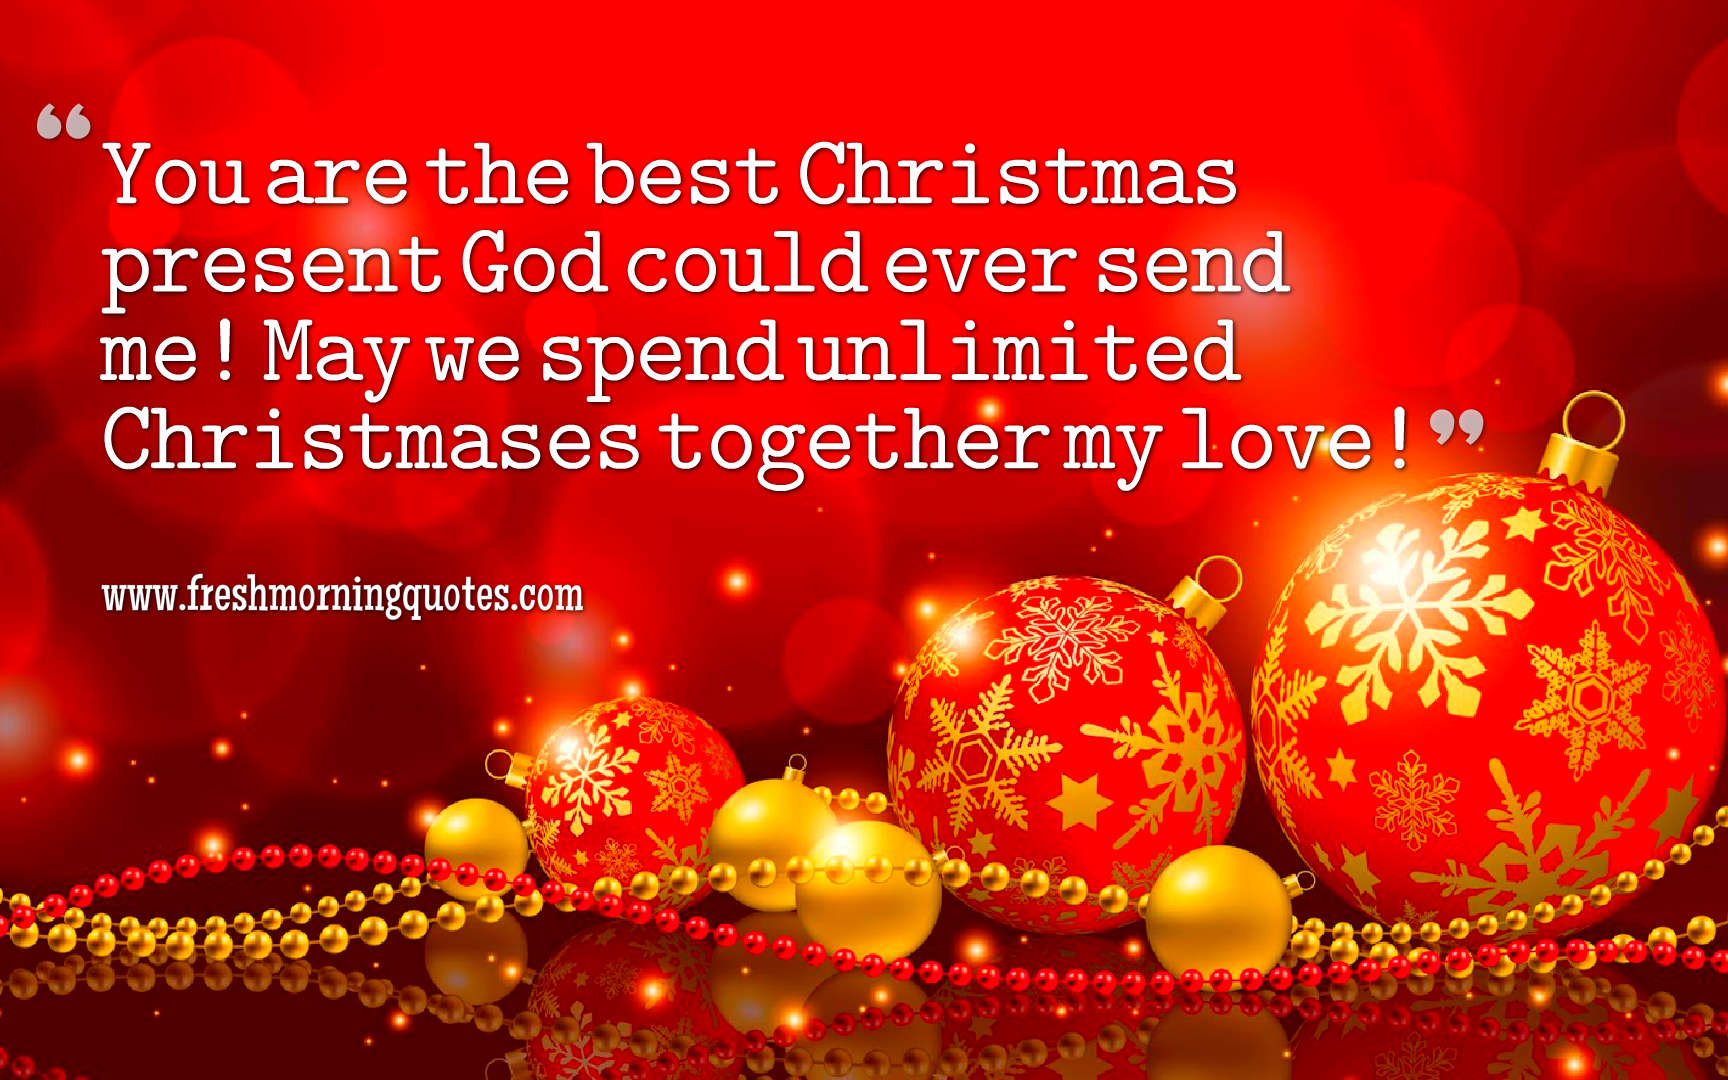 Heart Touching Christmas Love Messages for girlfriend